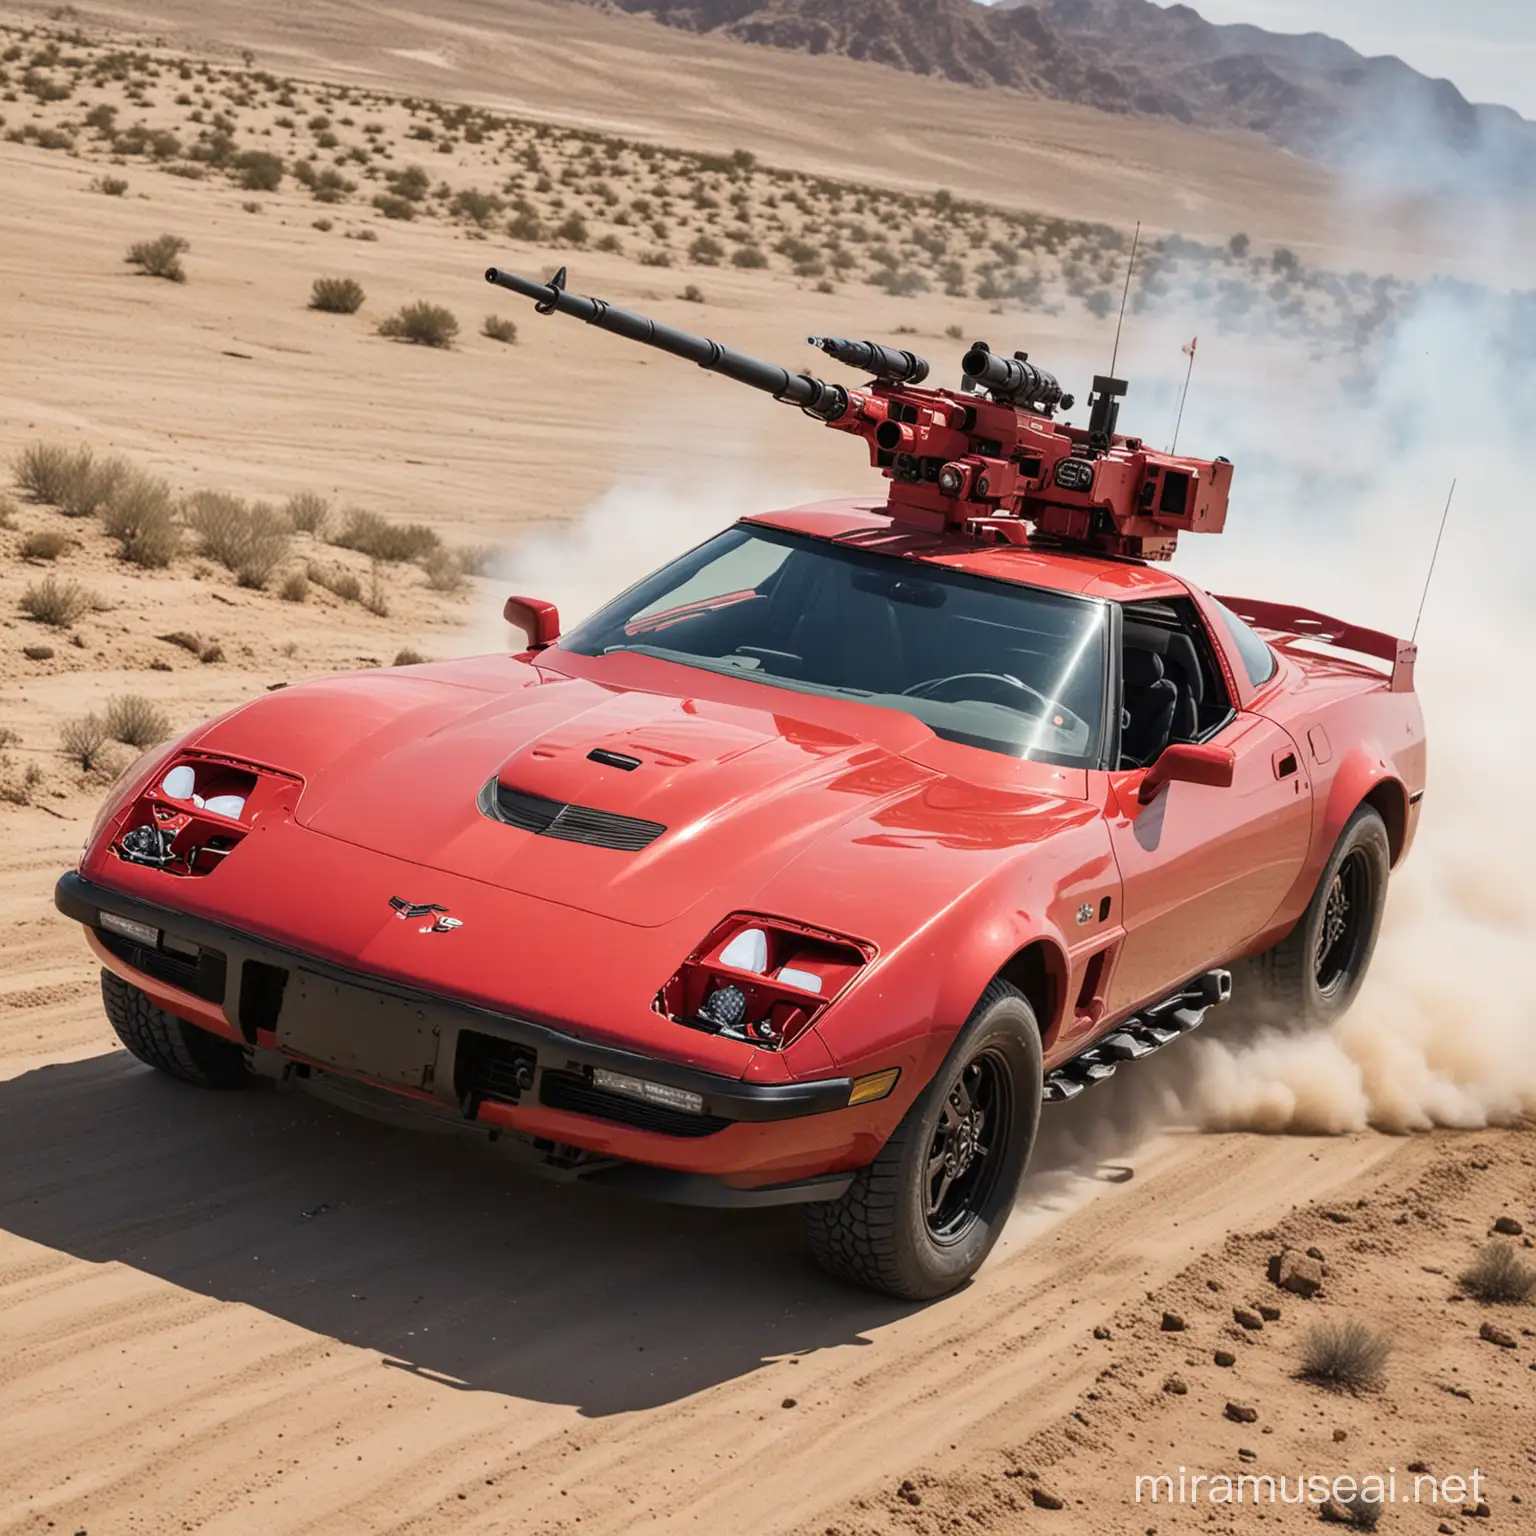 Sleek Red C4 Corvette Armed with Missile Launcher and Machine Guns